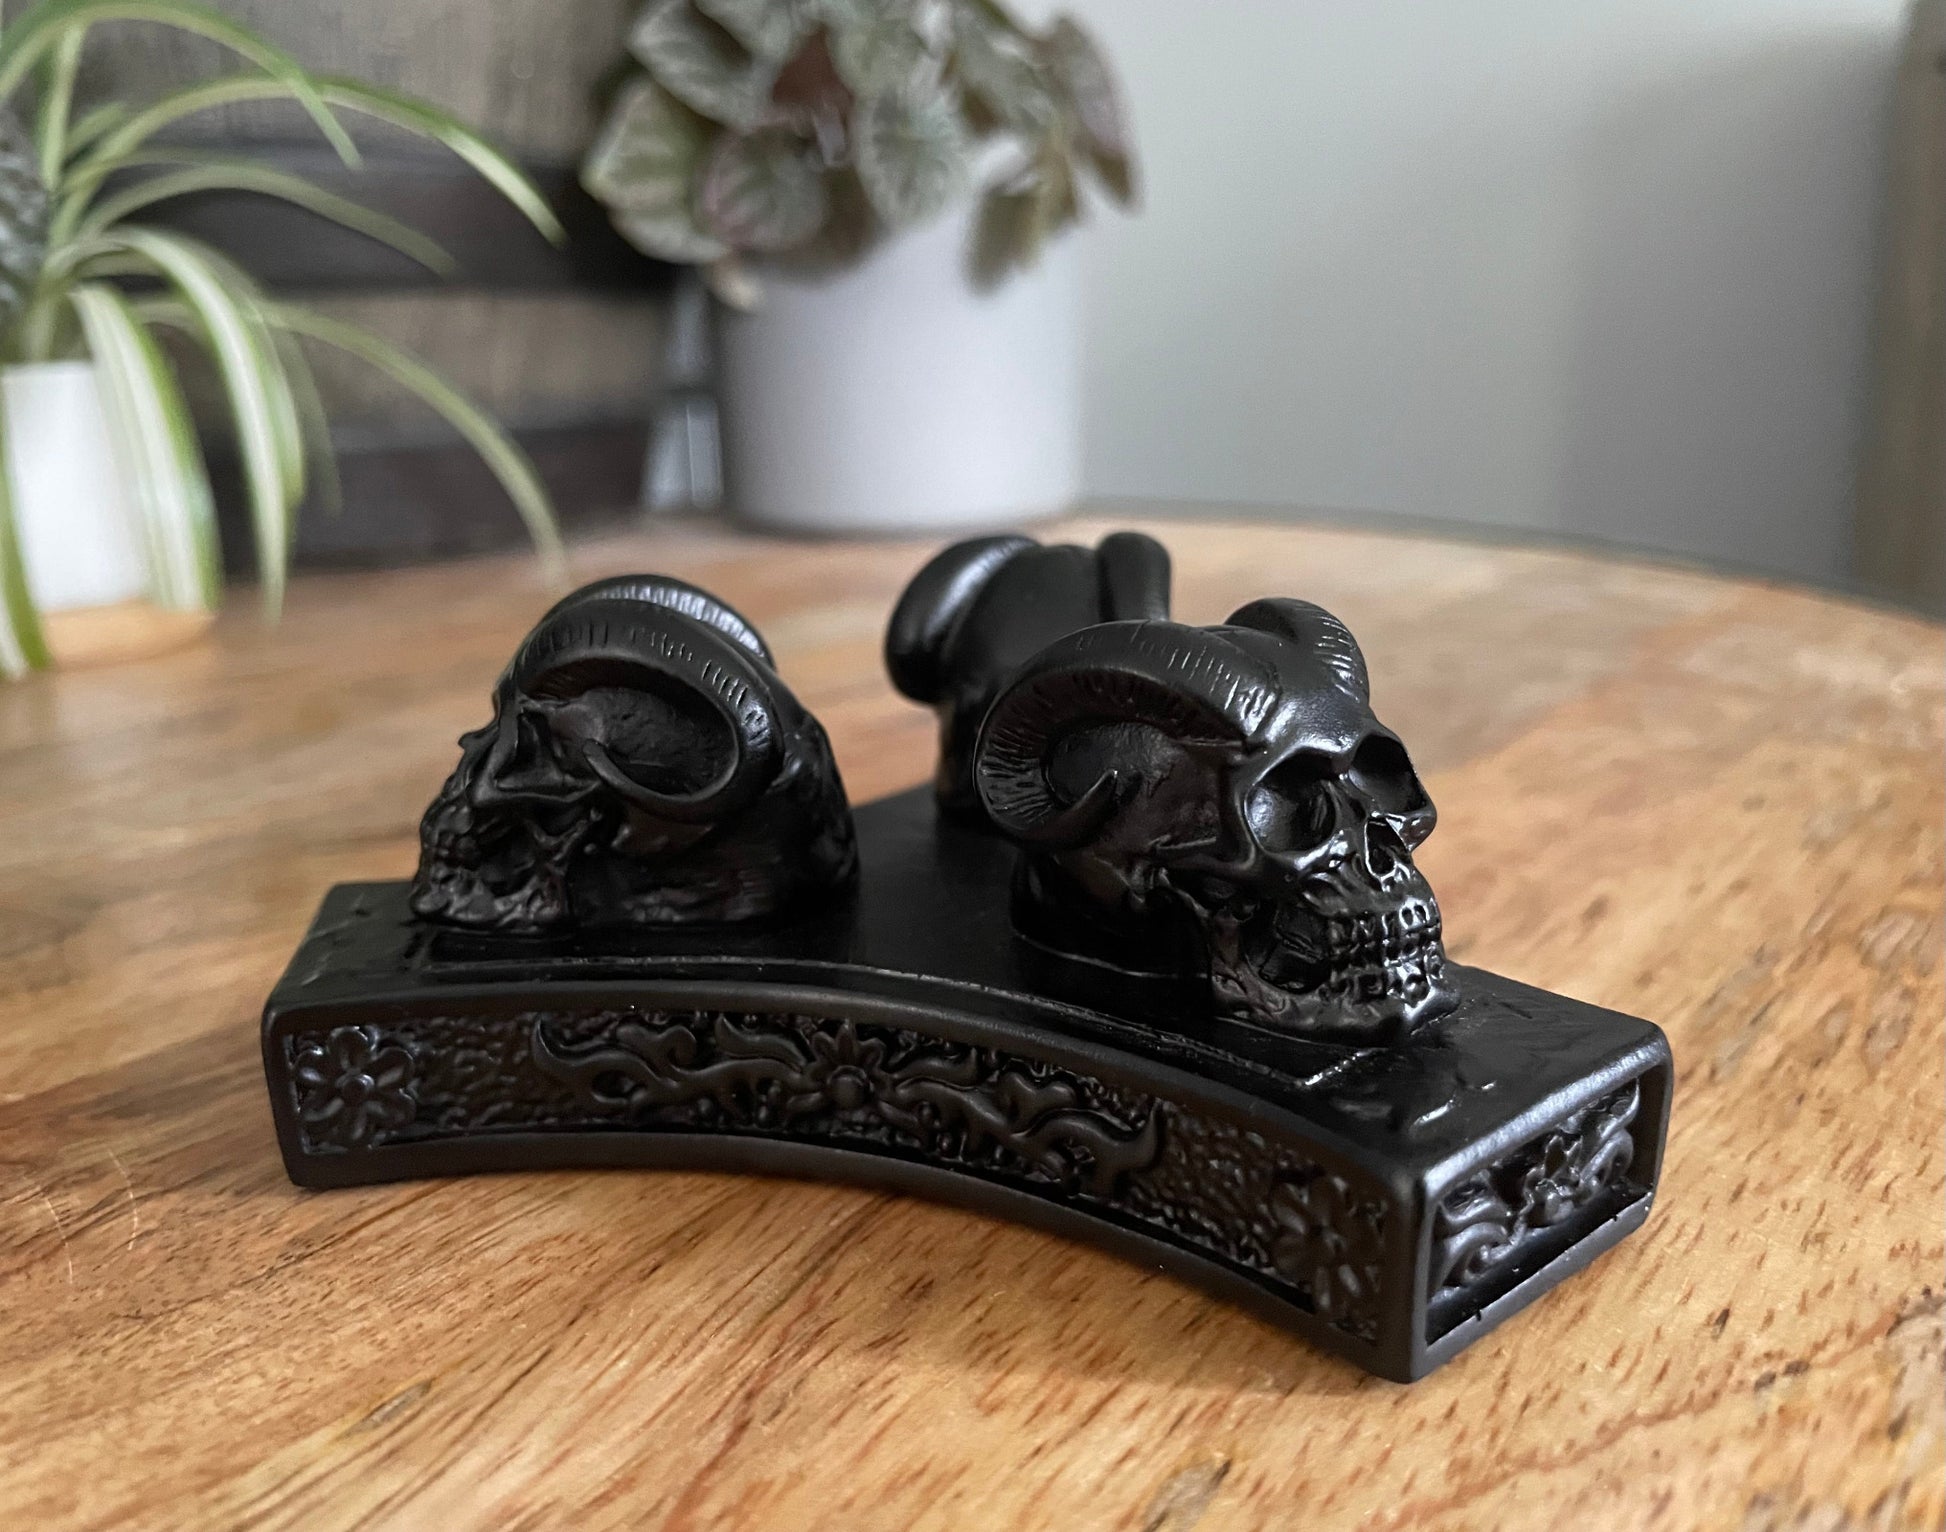 Pictured is a sphere stand in the shape of three demon skulls.